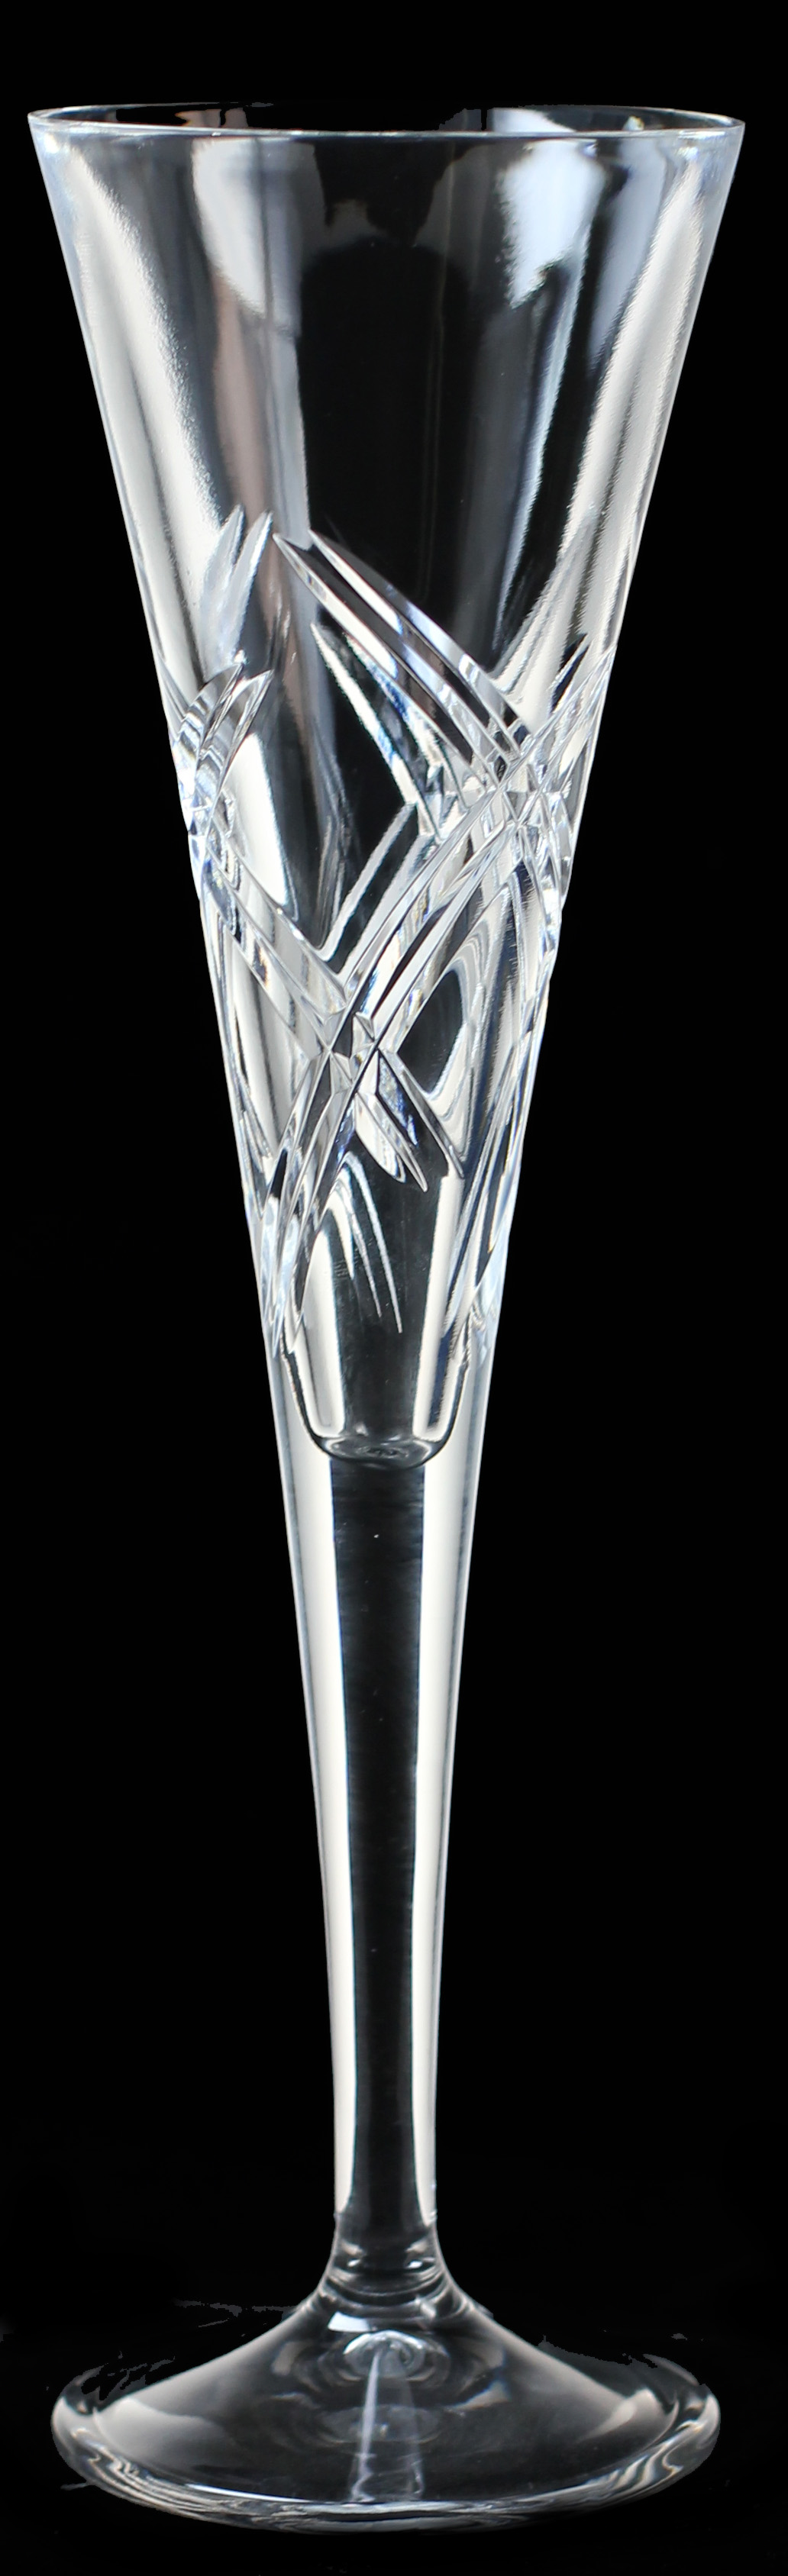 Brierley hill crystal Prosecco celebration glass